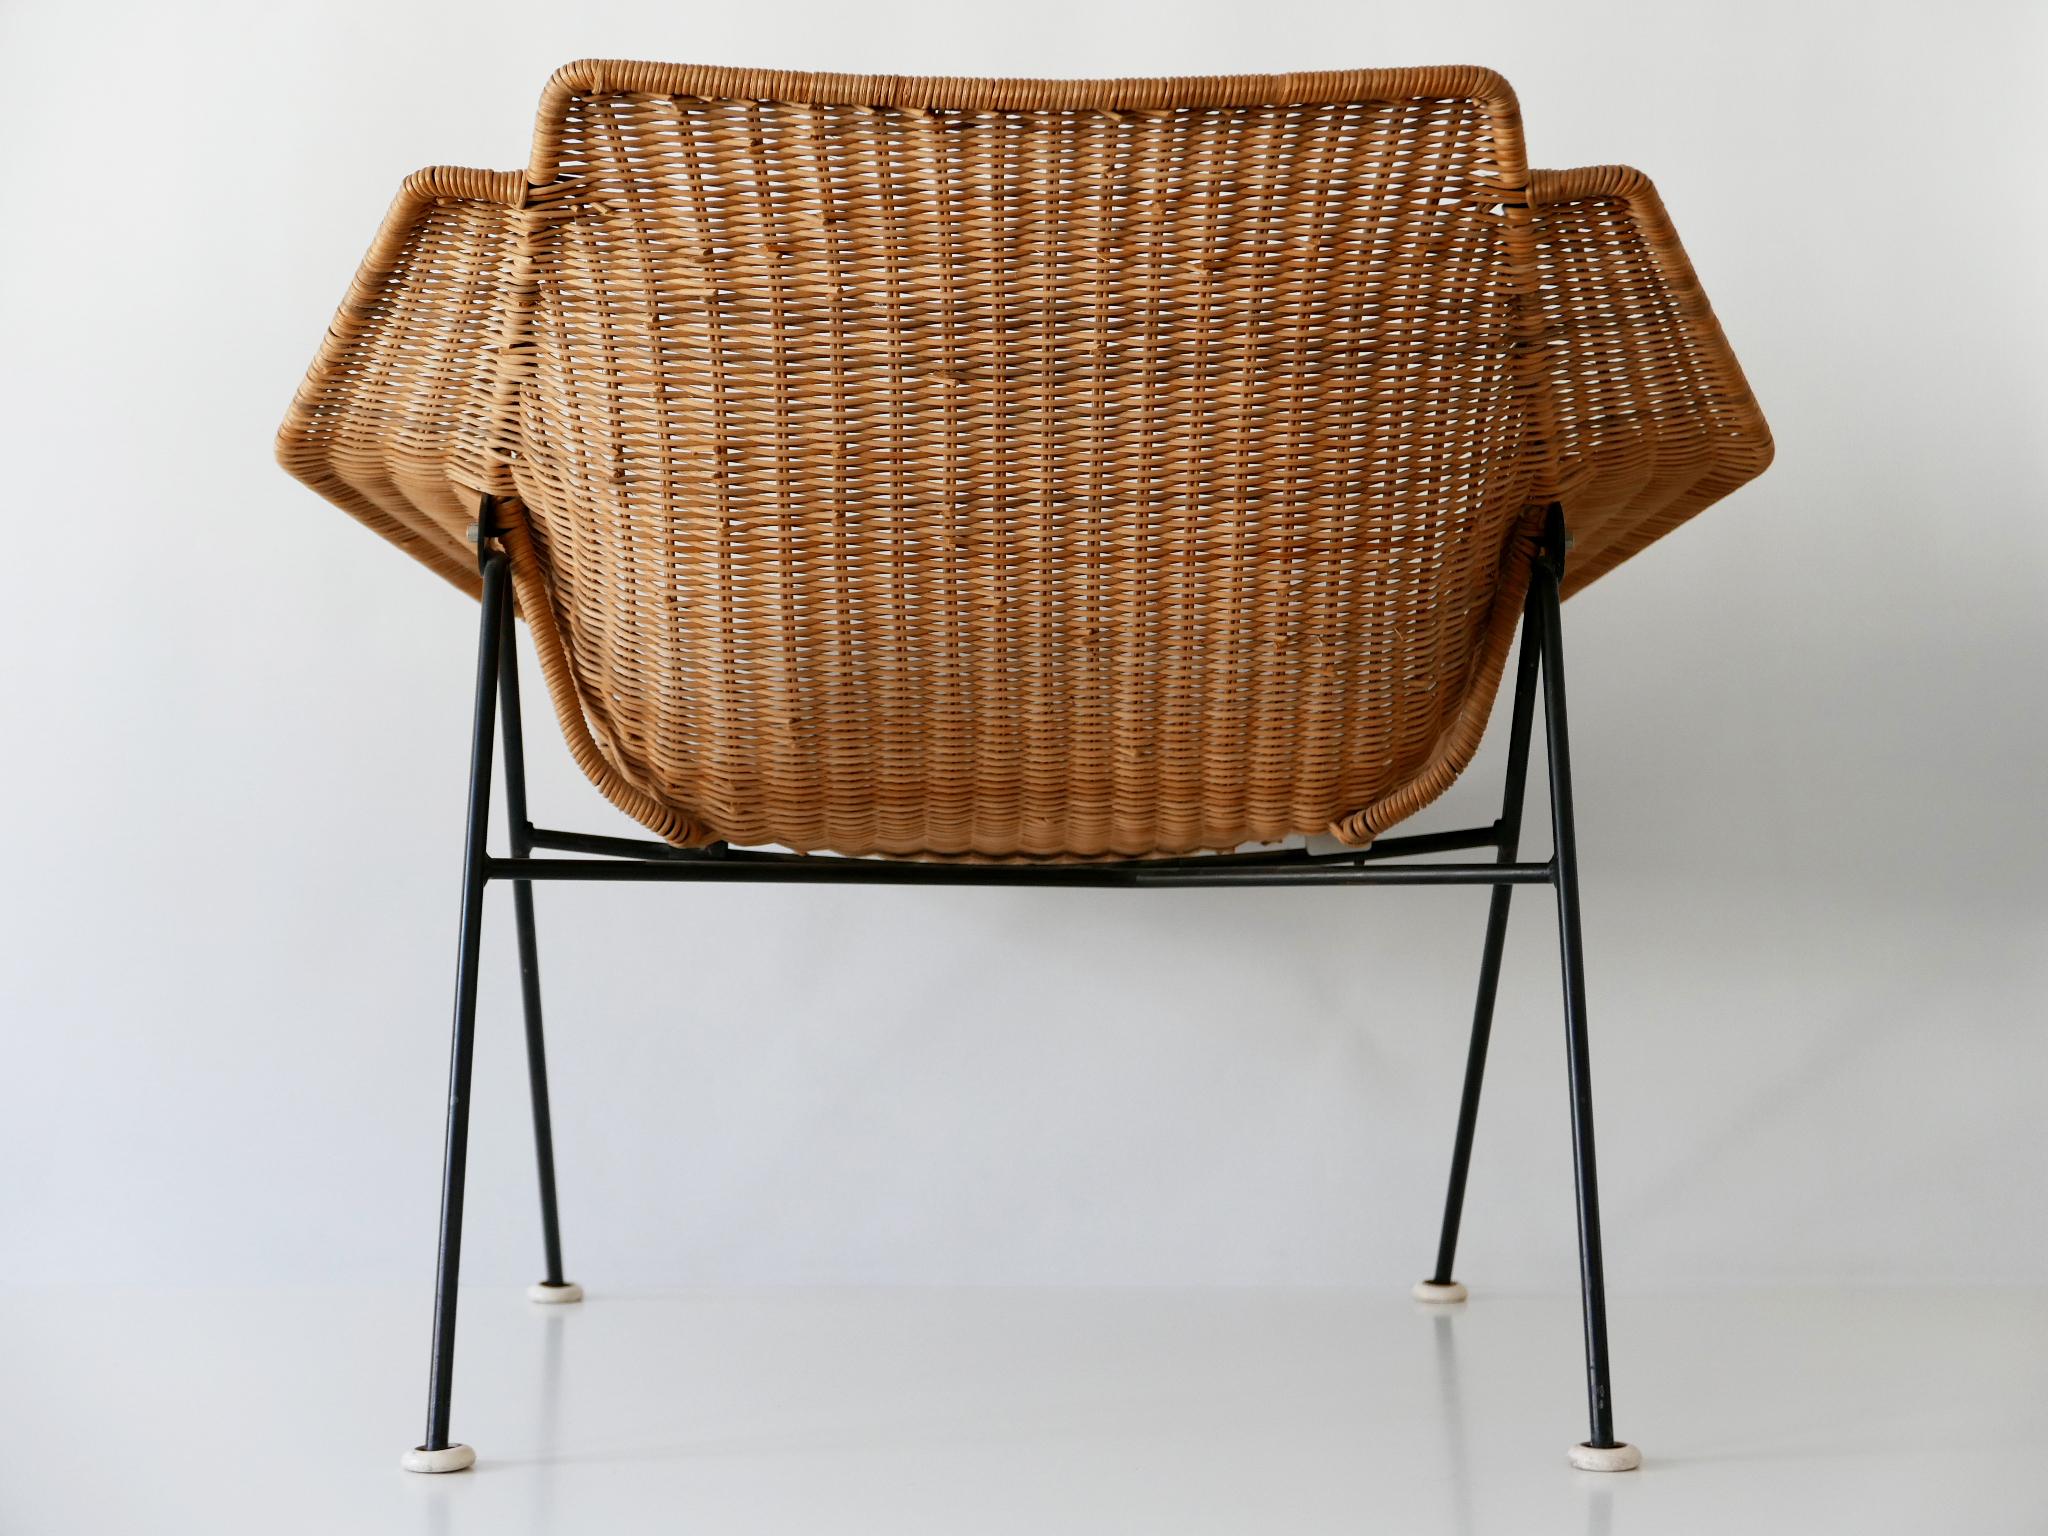 Exceptional Mid-Century Modern Wicker Lounge Chair or Armchair 1950s Sweden For Sale 9